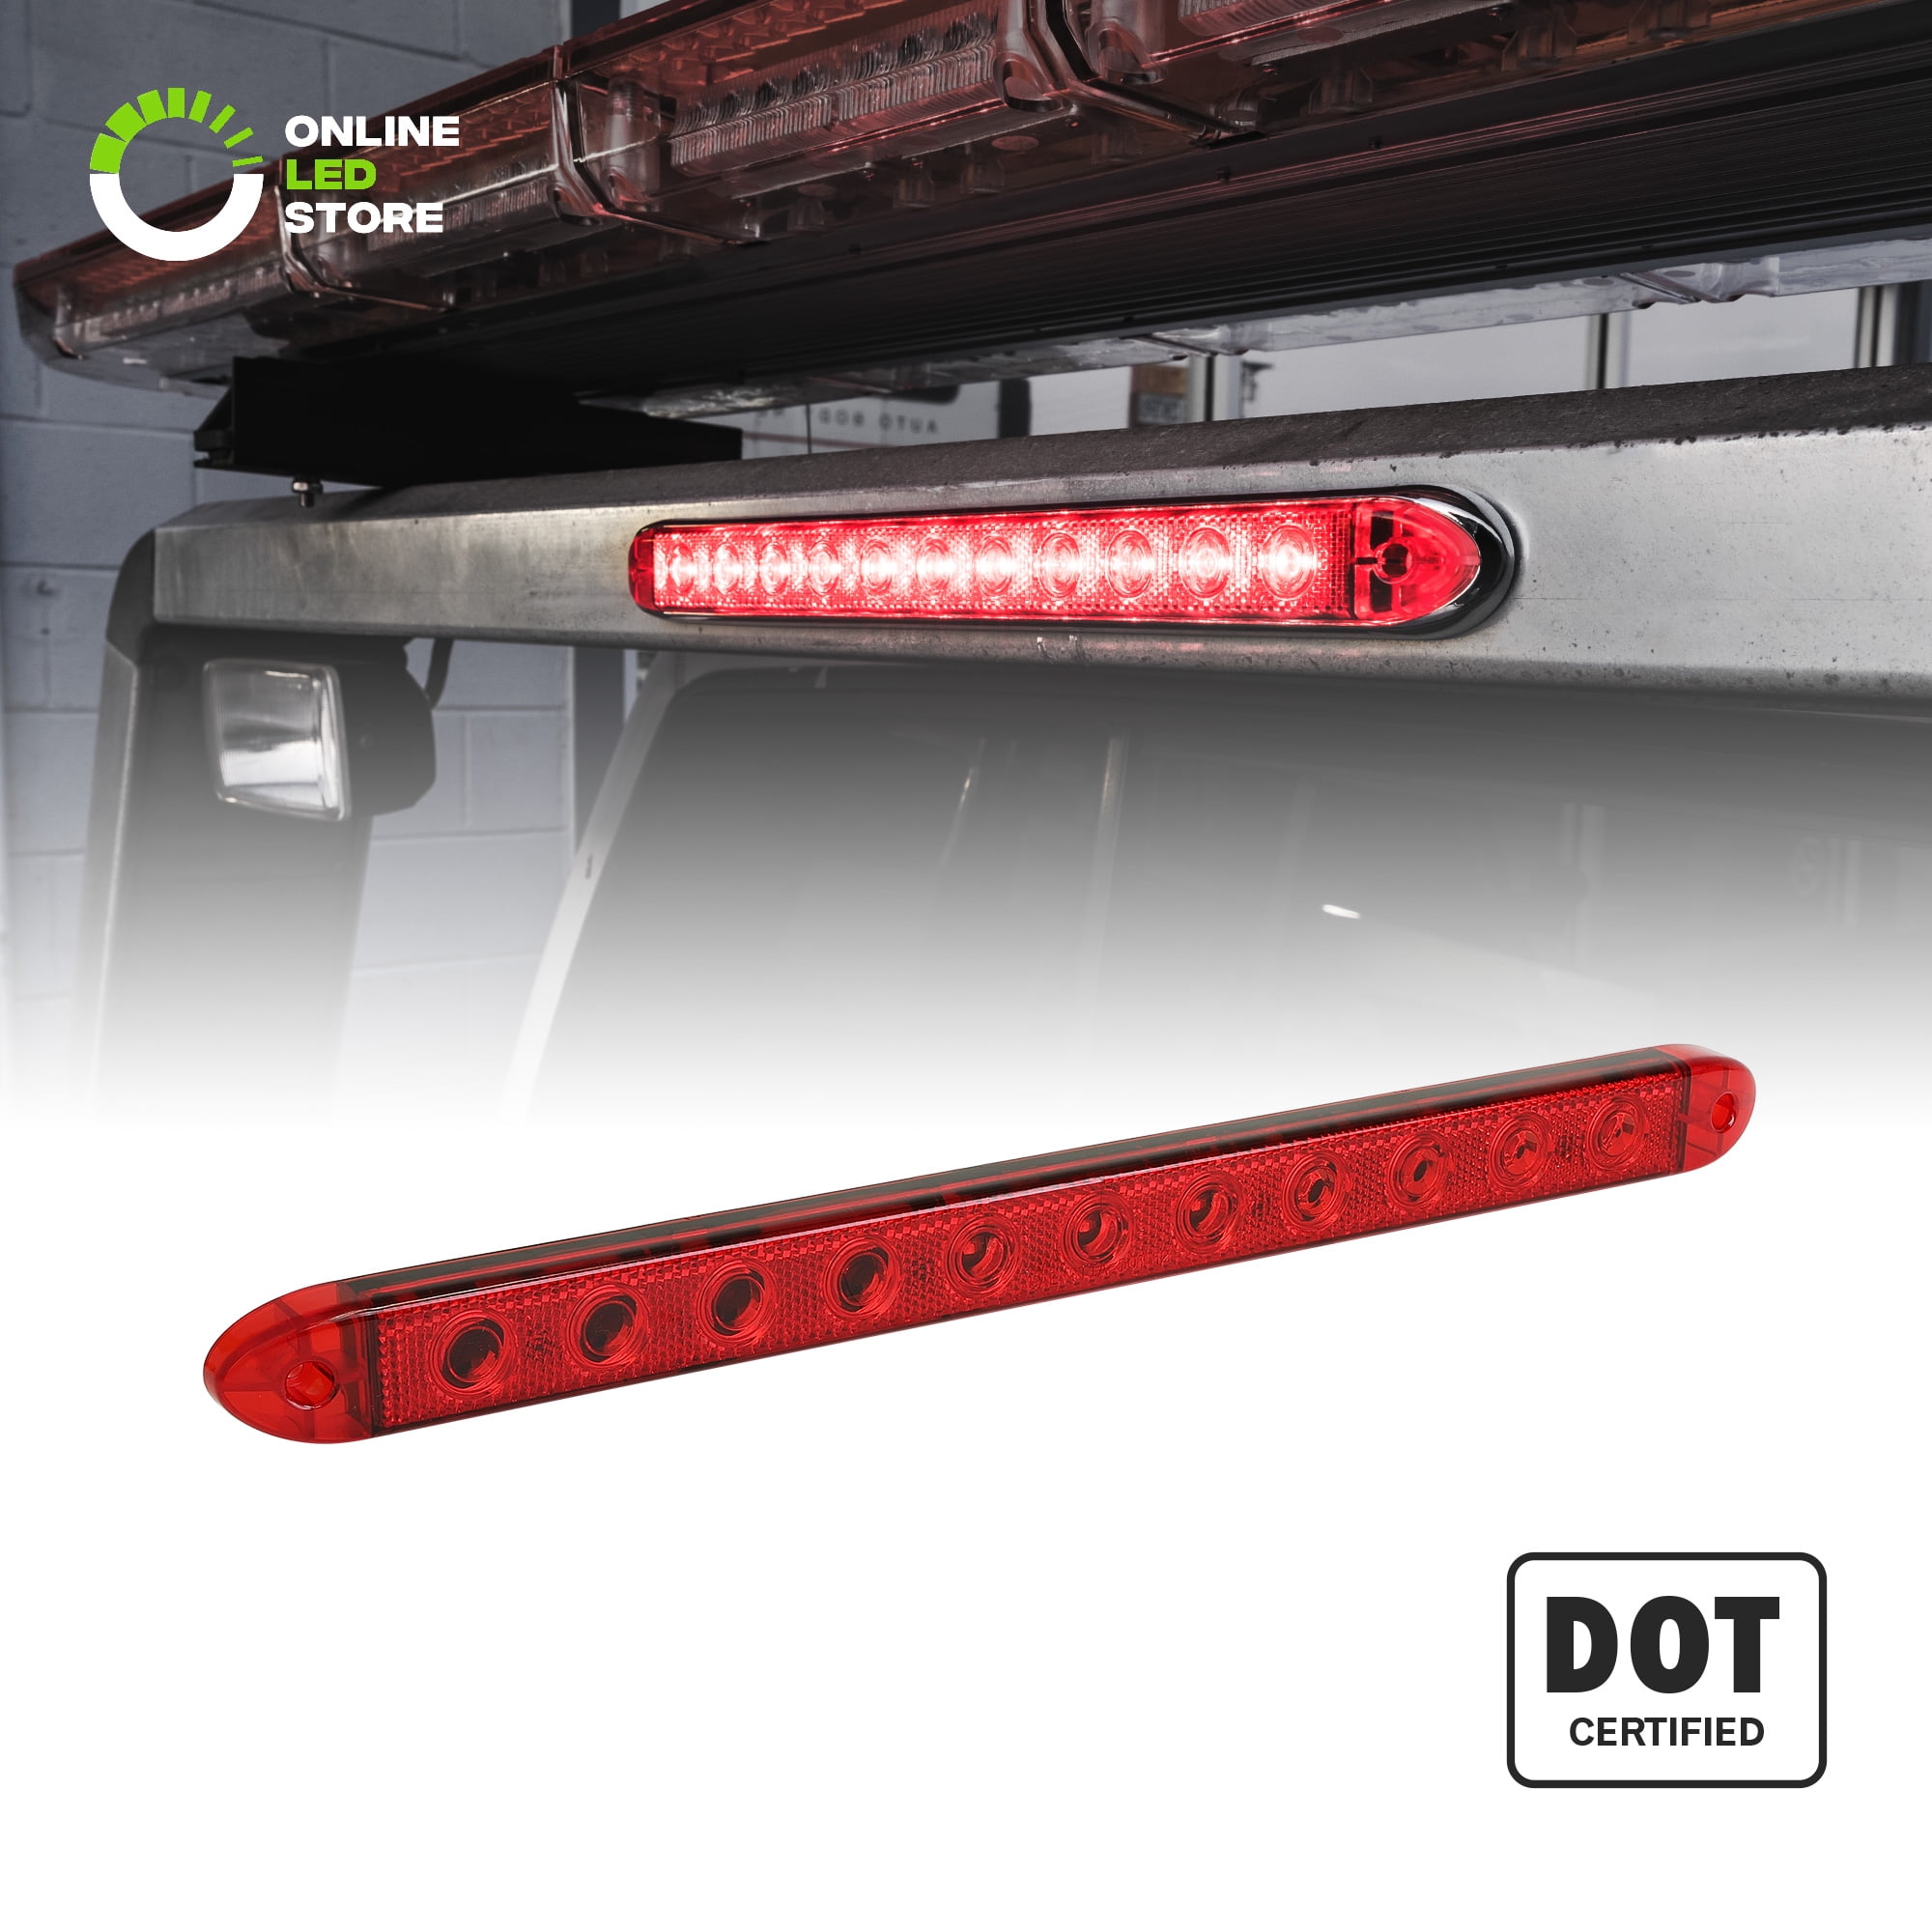 NEW SUN Red Clearance ID Light Bar Trailer Light 3 Lights 9 LED Indicator Surface Mount Sealed Stainless Steel